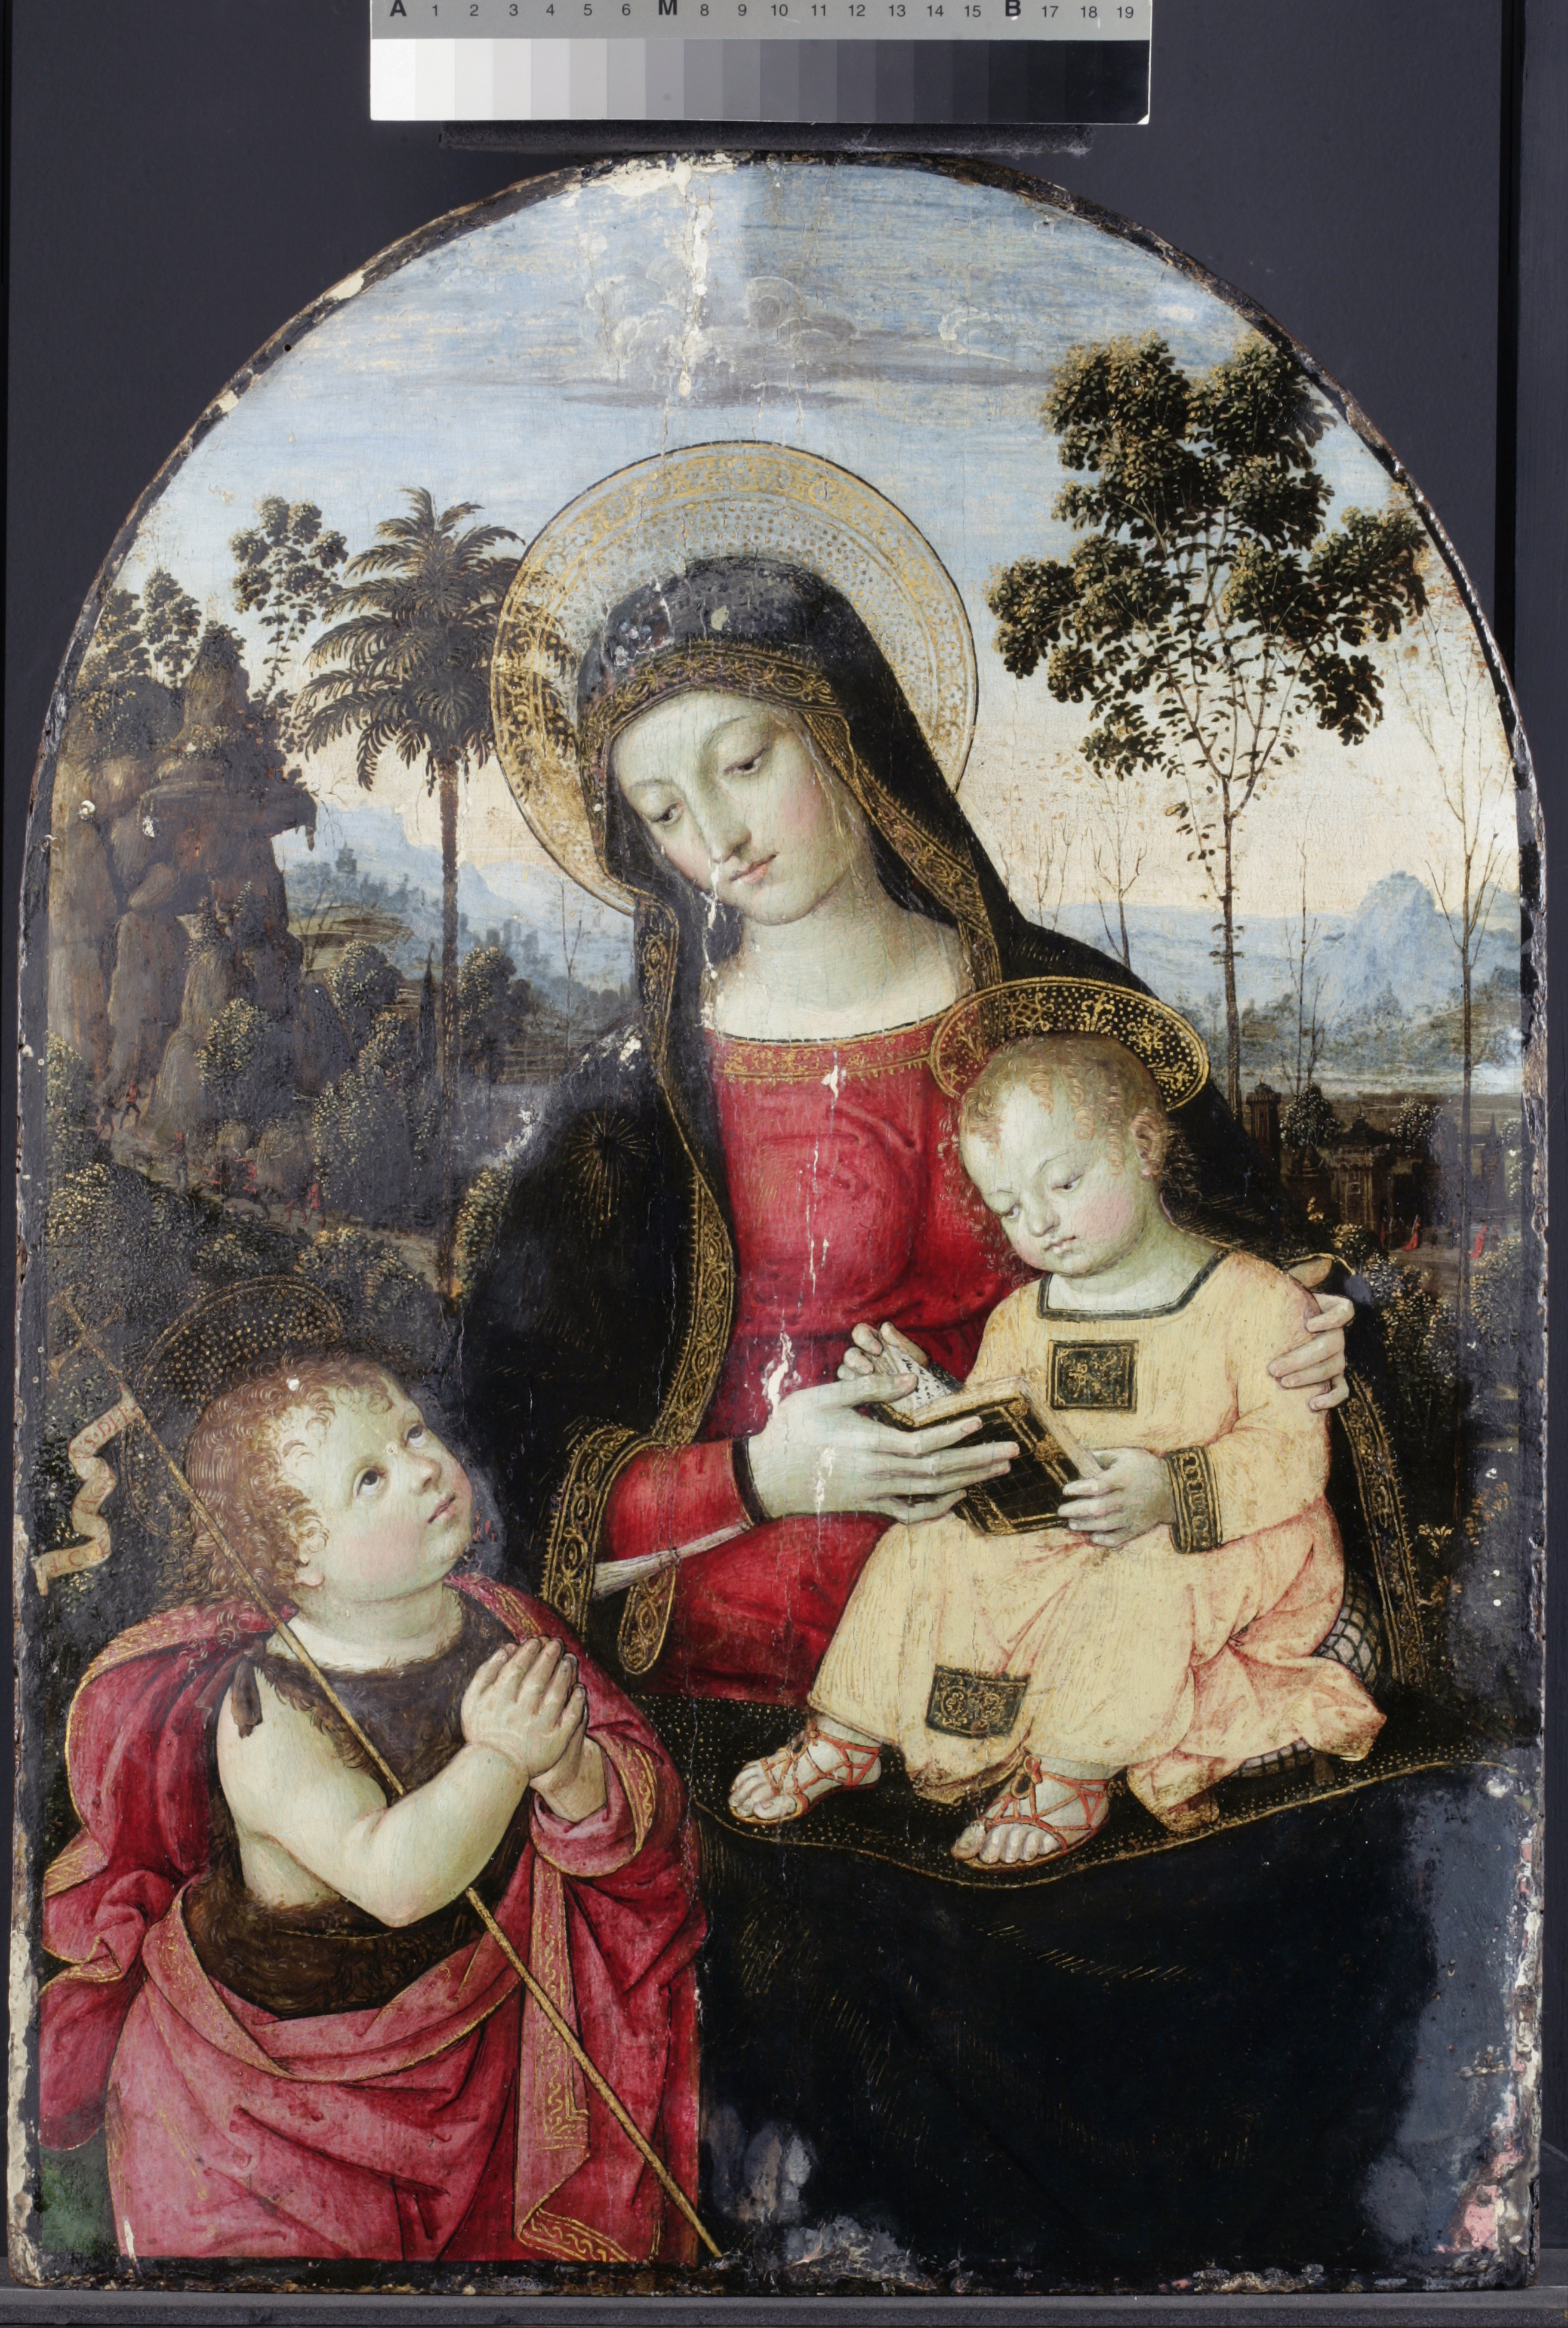 Fig. 5 Virgin and Child during treatment showing varnish removal in progress (©Rayner)